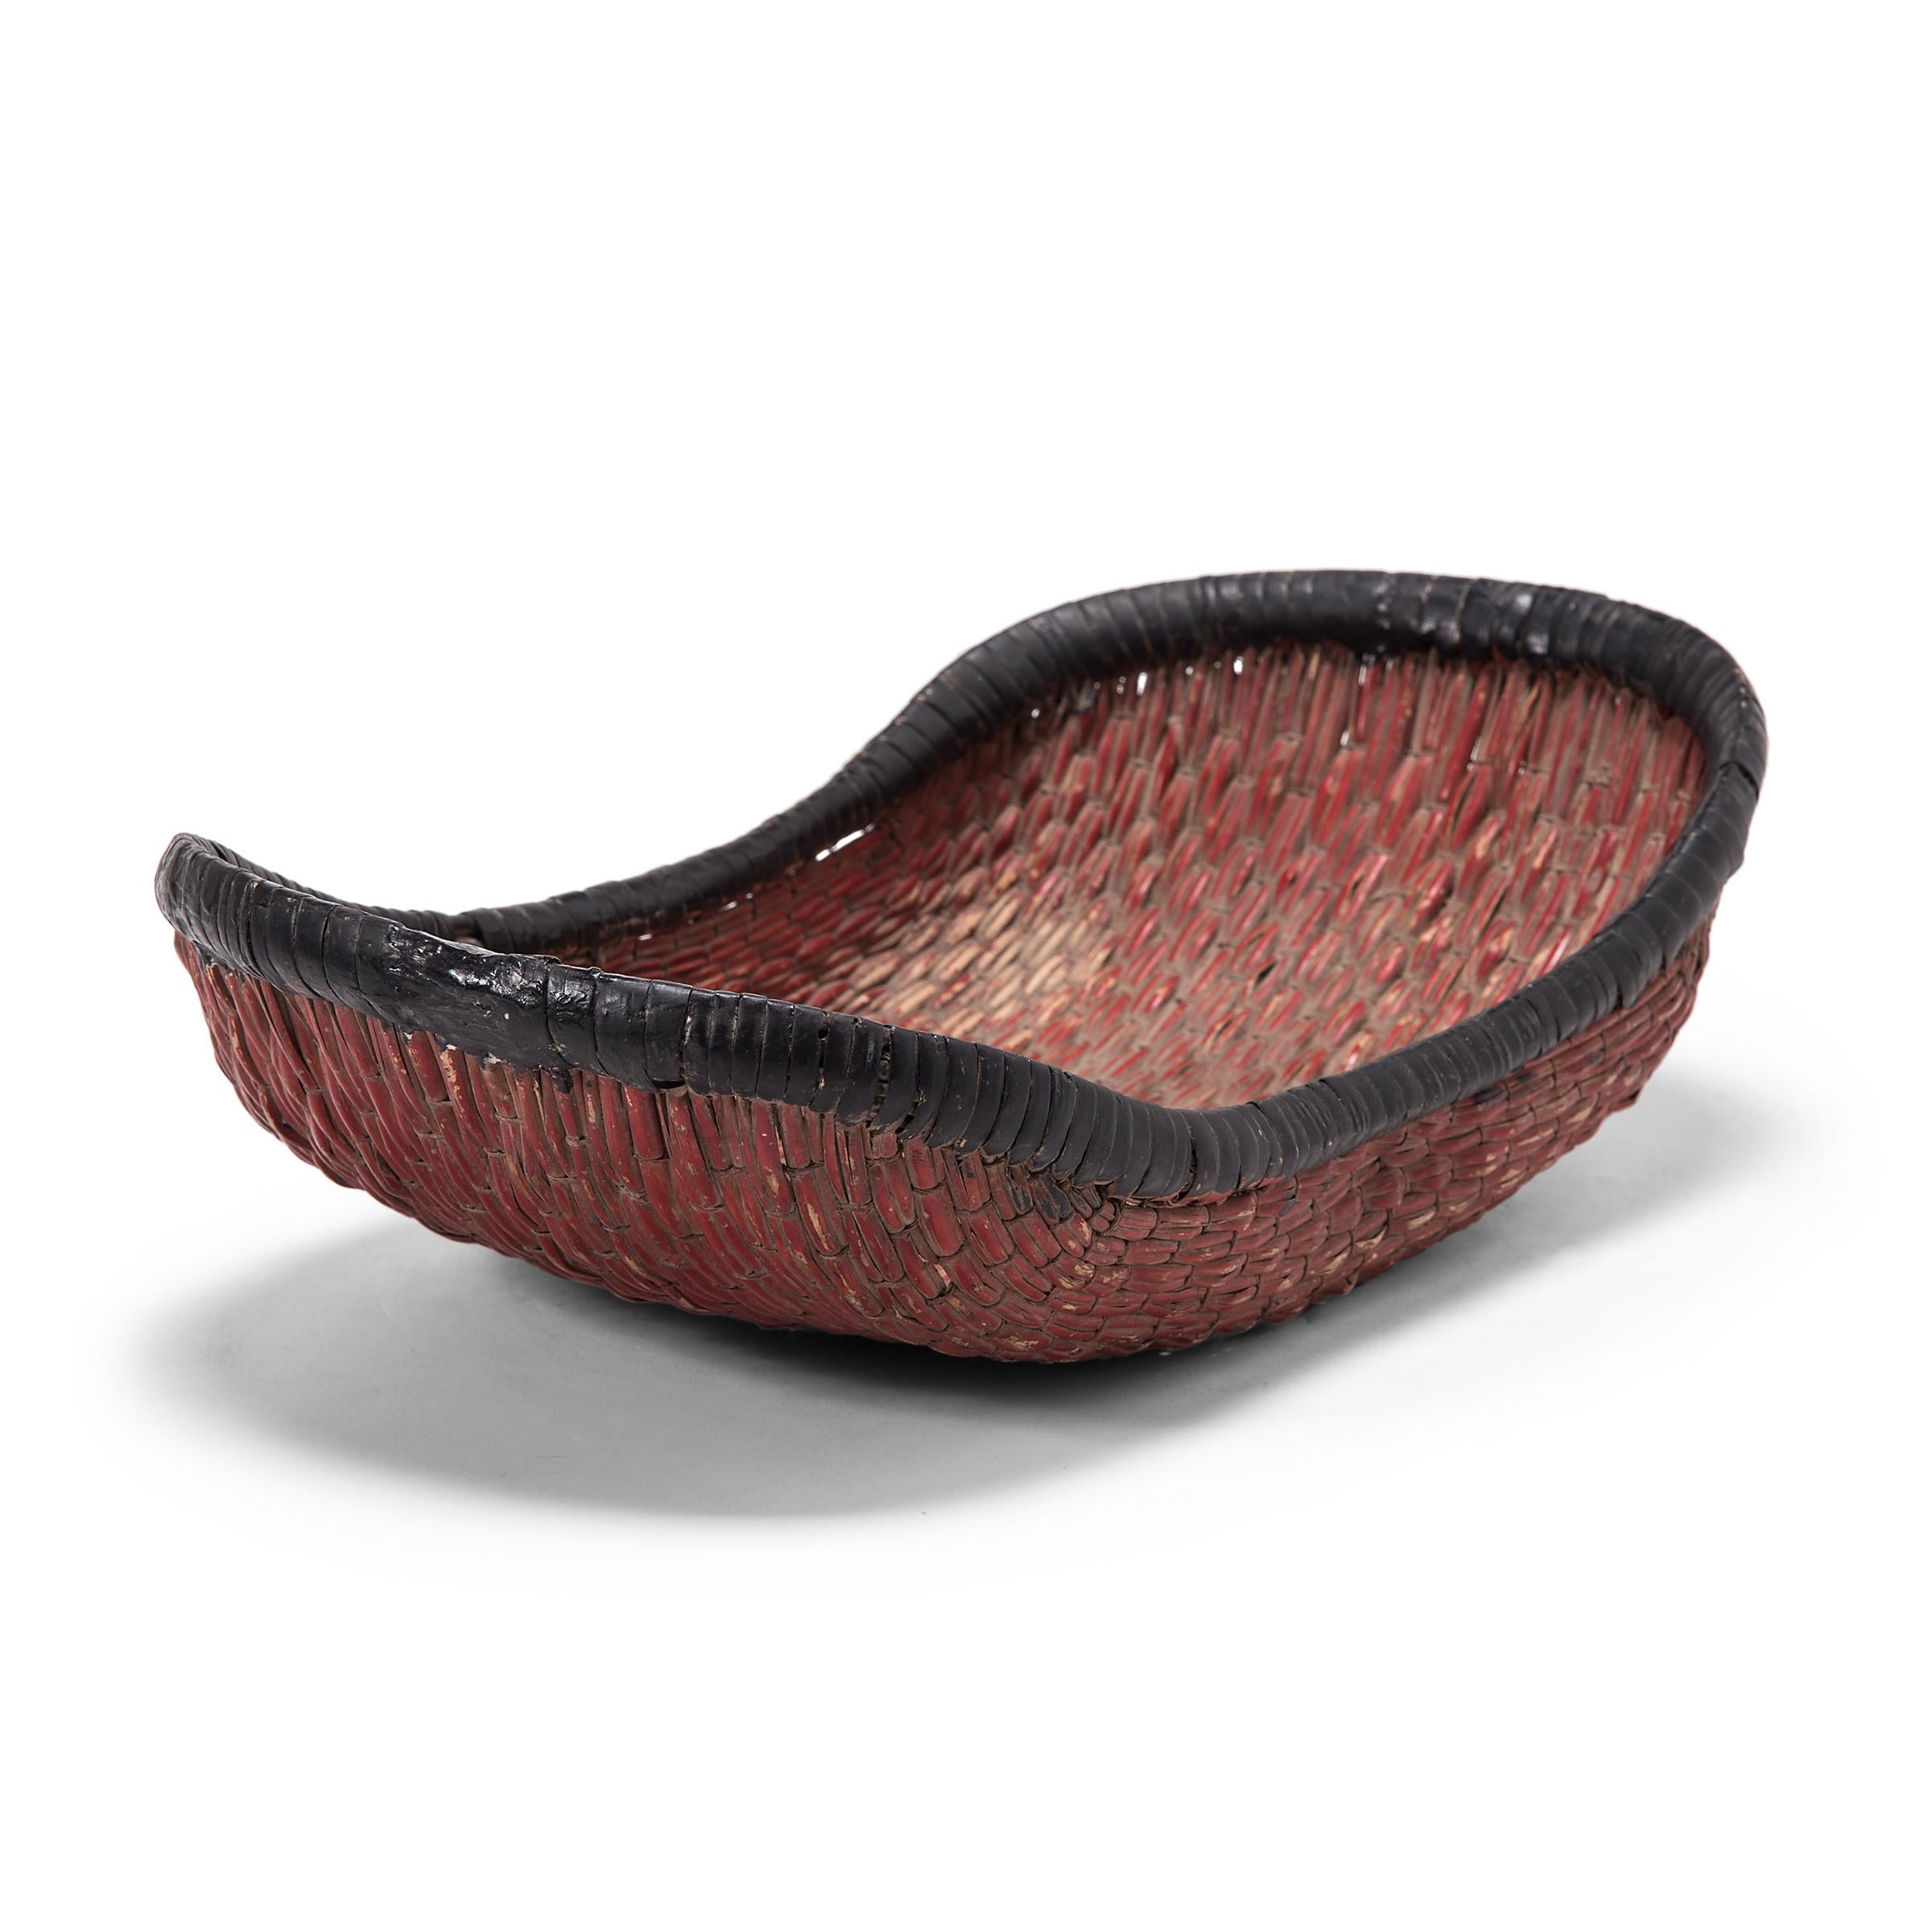 Woven with a delightfully unusual form, this early 20th century basket was originally used to steam mantou buns in a provincial home in Shanxi province. The boat-shaped basket is formed of willow reeds entwined with a plain weave, and has since been